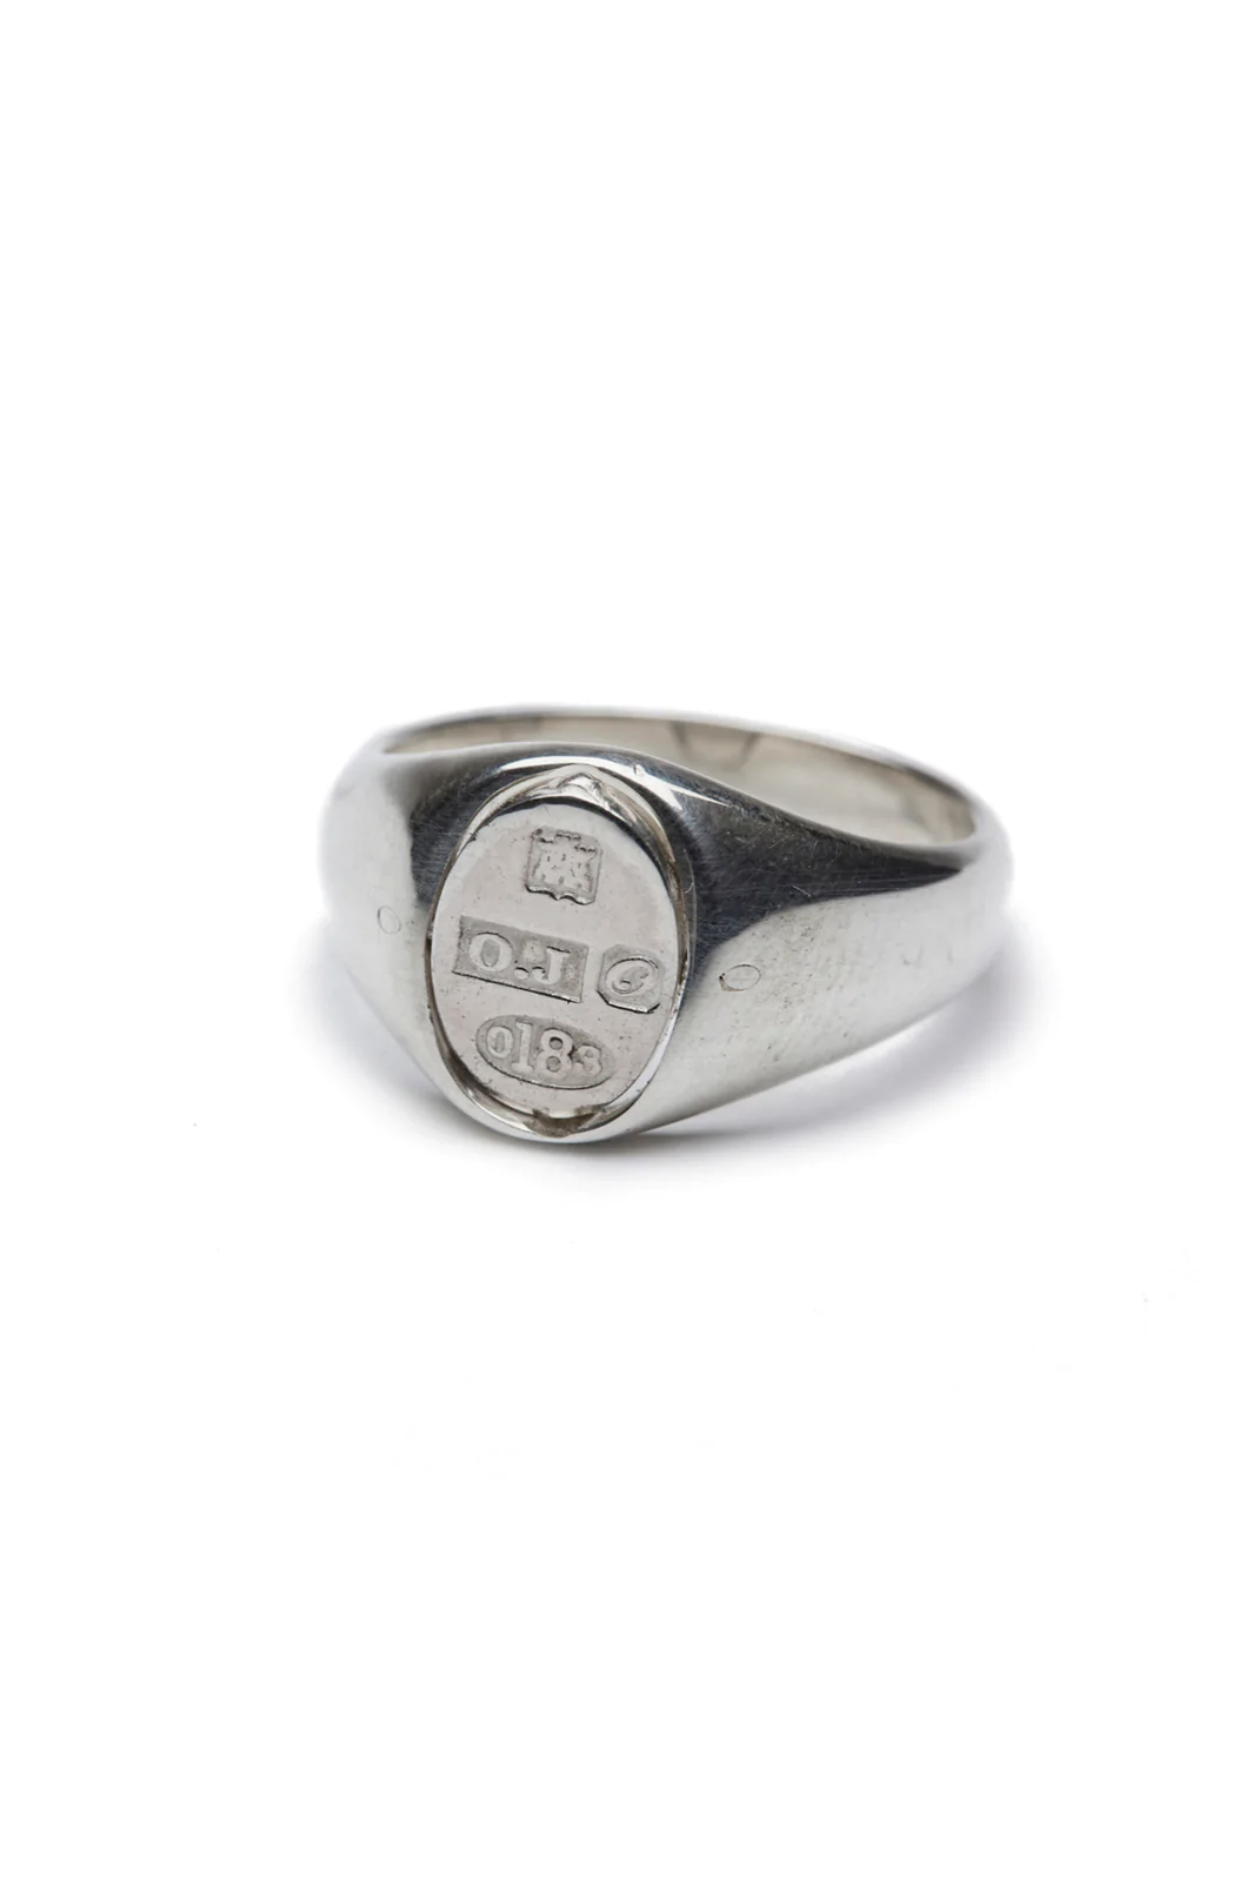 OLD JOE STATE HOUSE - OVAL SIGNET RING / STAMPED